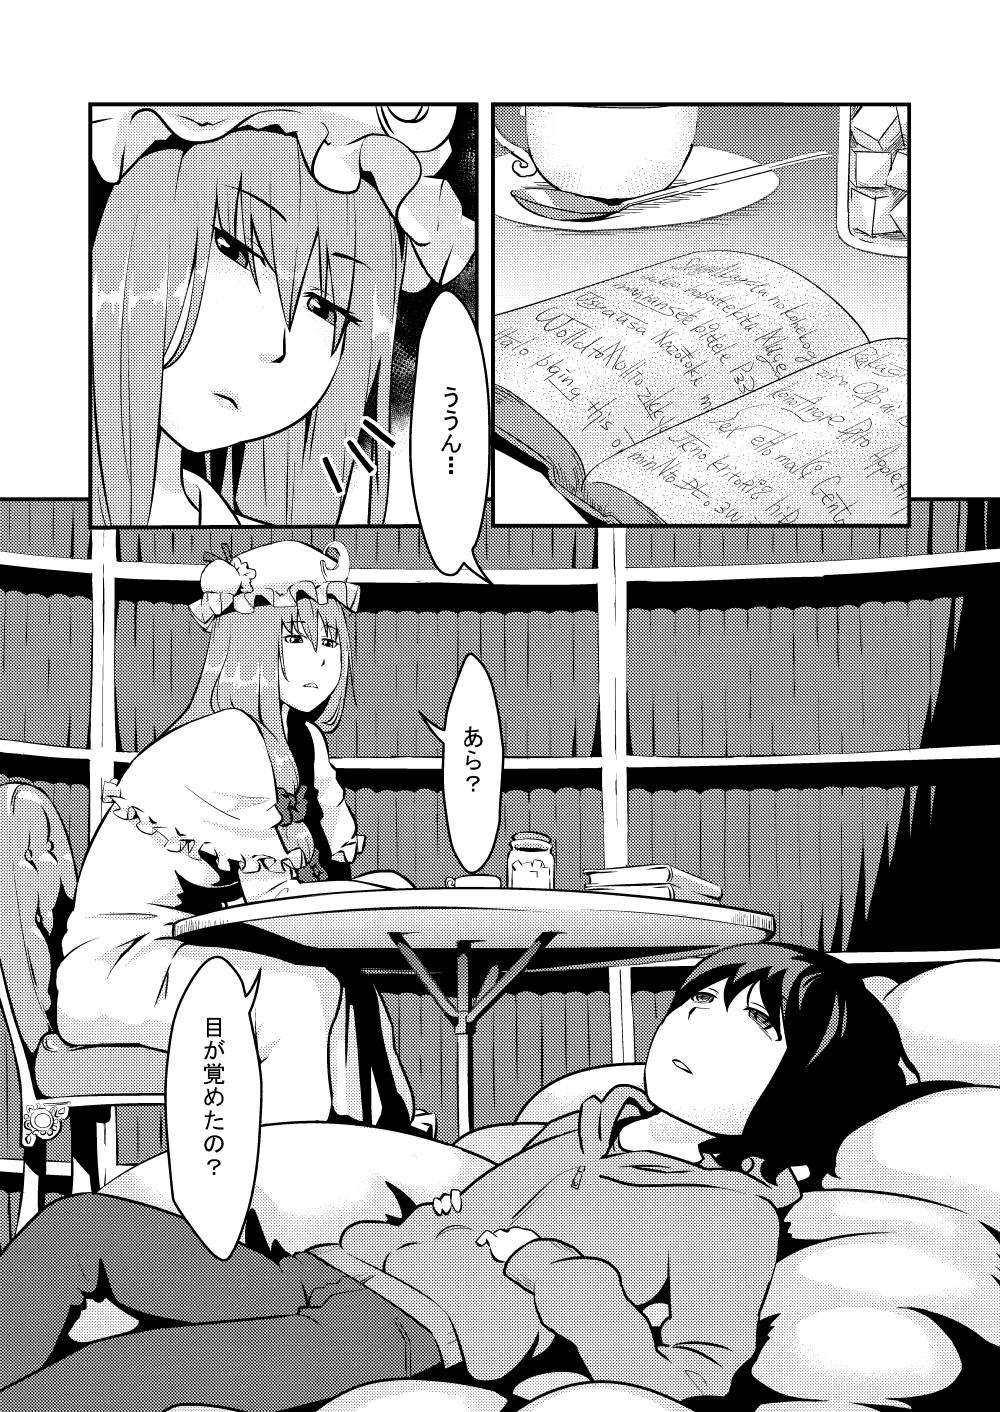 Inked おねしょたパチュリー - Touhou project Hot Couple Sex - Picture 1